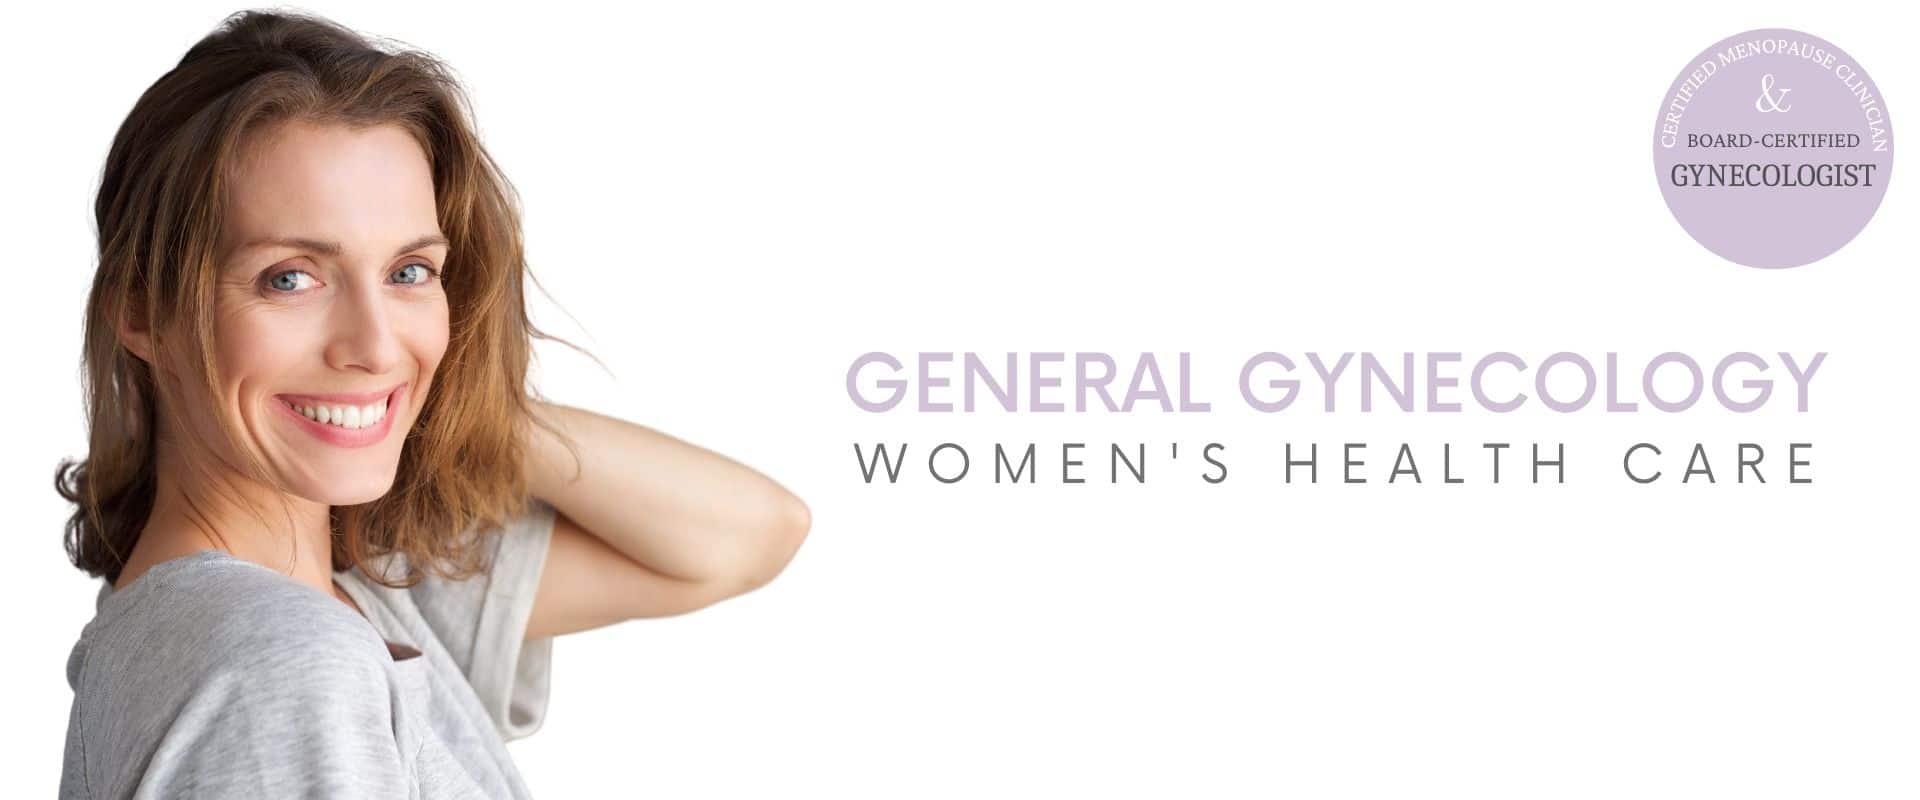 General Gynecology Women's Health New England in Middleboro, MA.